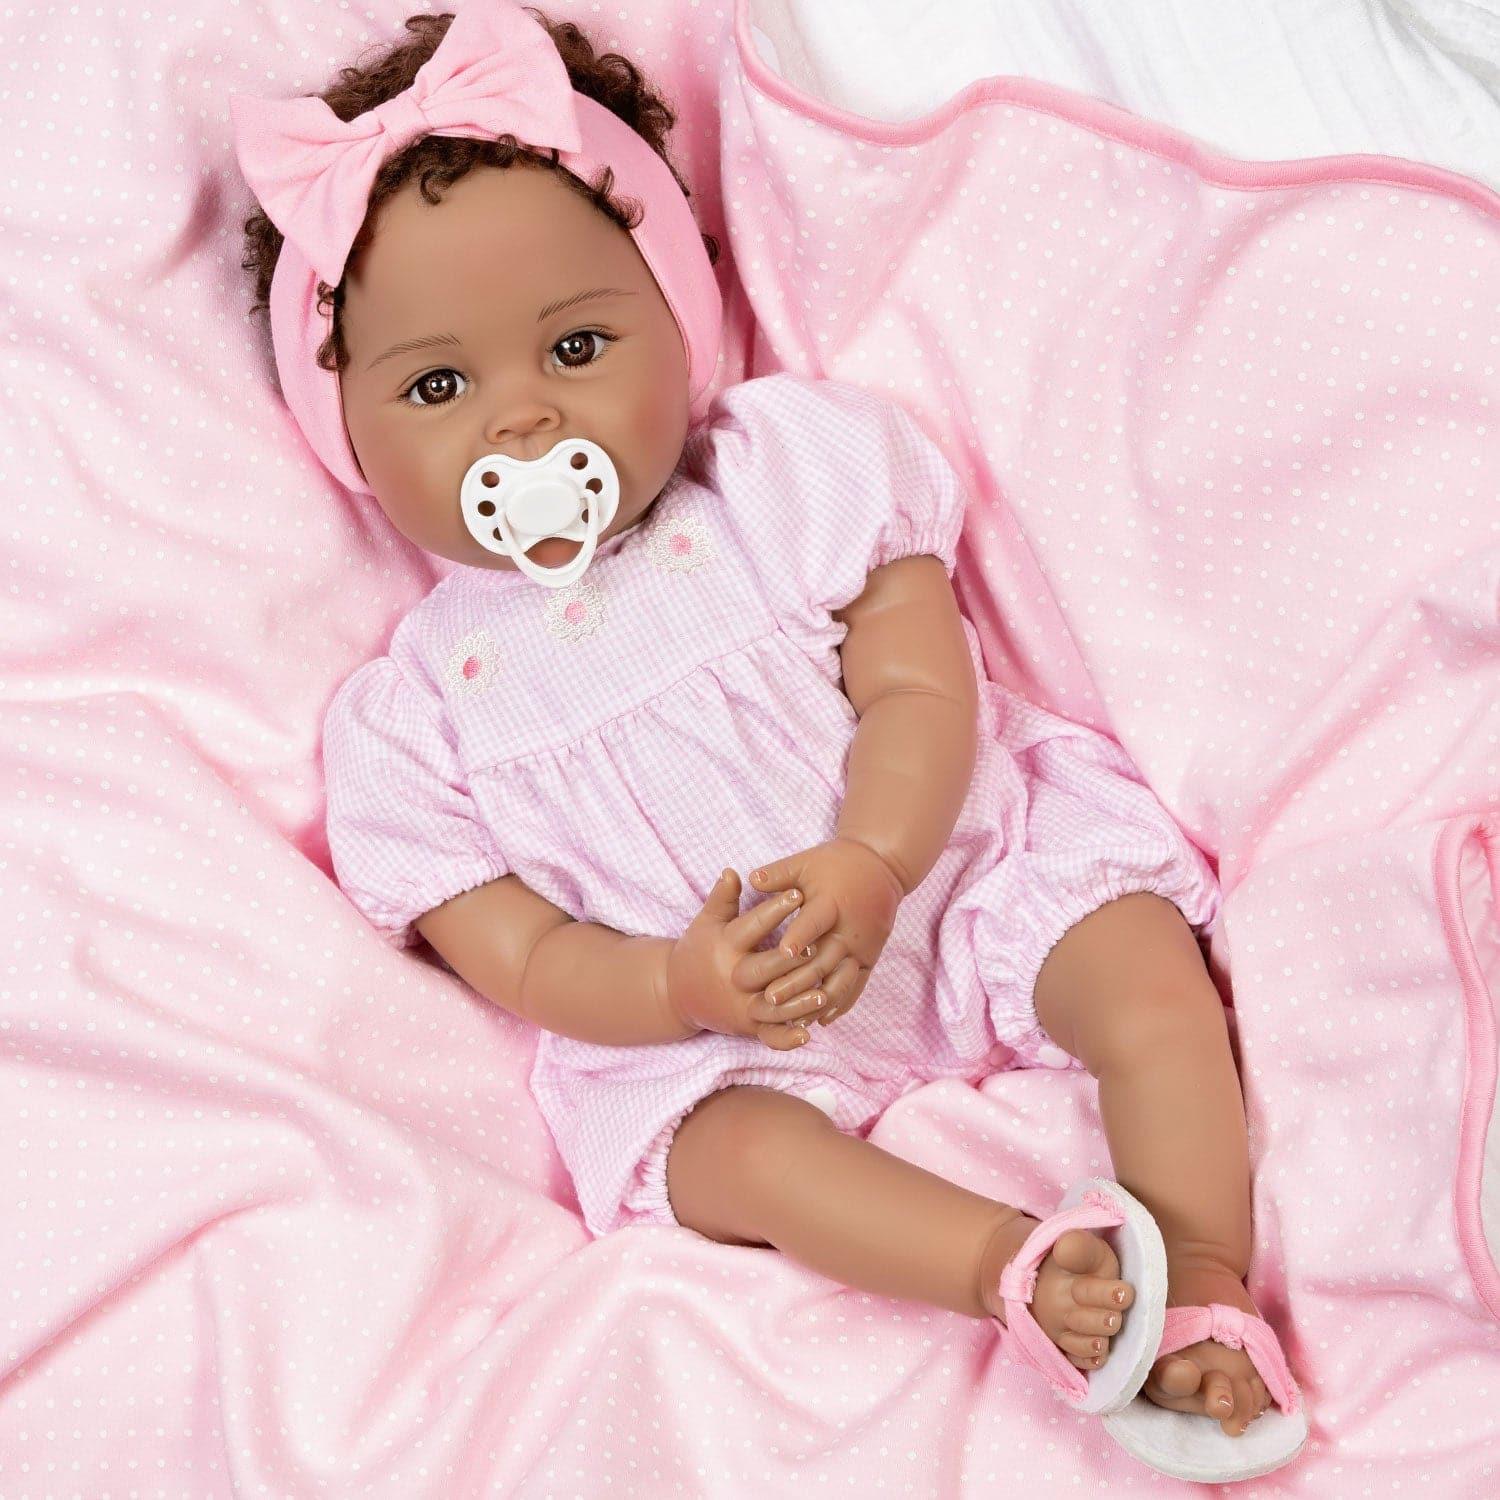 Paradise Galleries African Reborn Baby Doll Daisy May